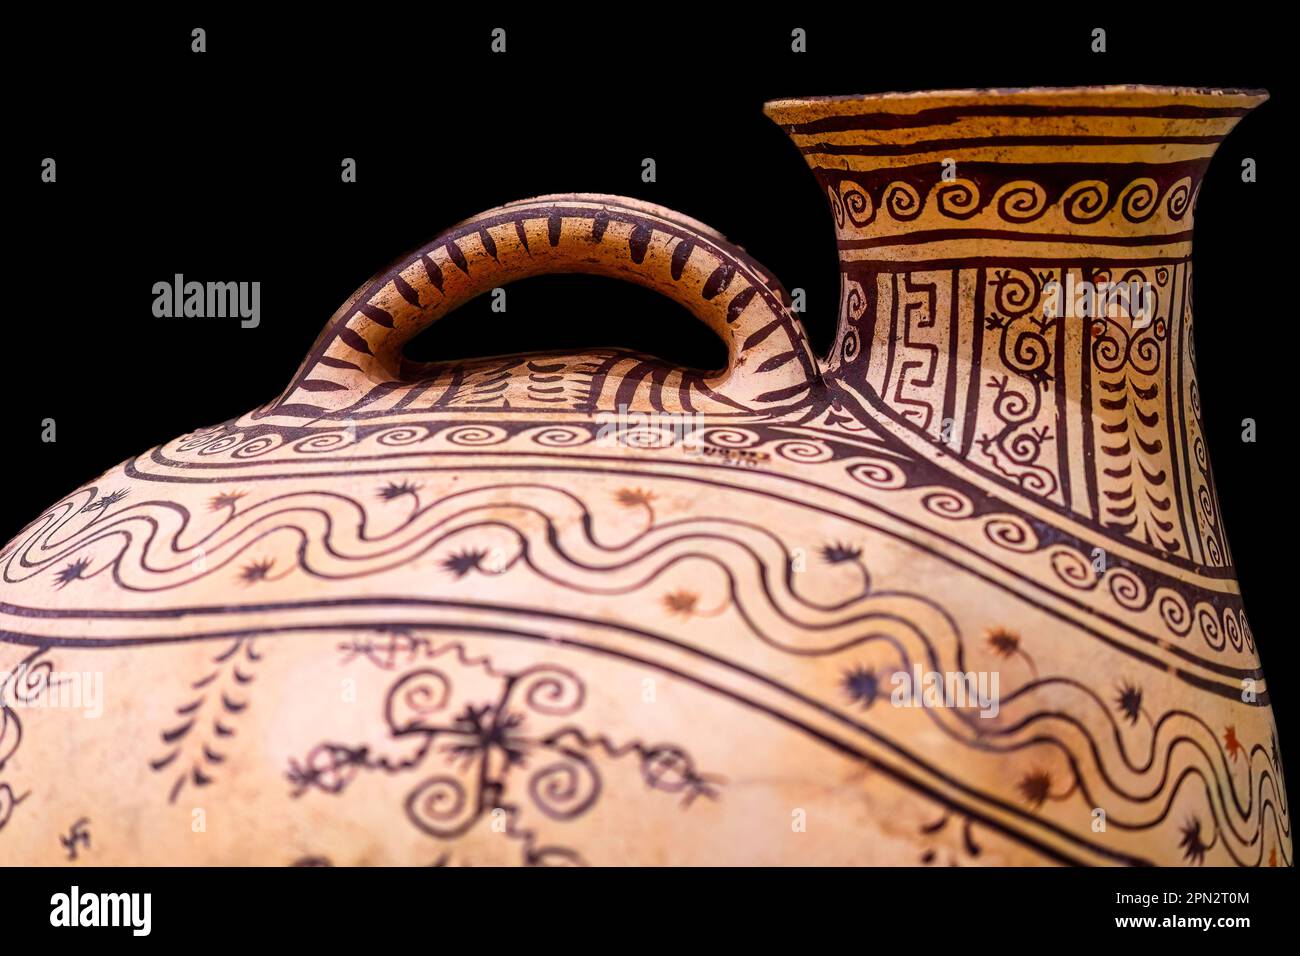 Toronto, Canada - April 7, 2023: Detail of pottery from the early Italic cultures. The object is part of an exhibit in the Royal Ontario Museum. Stock Photo